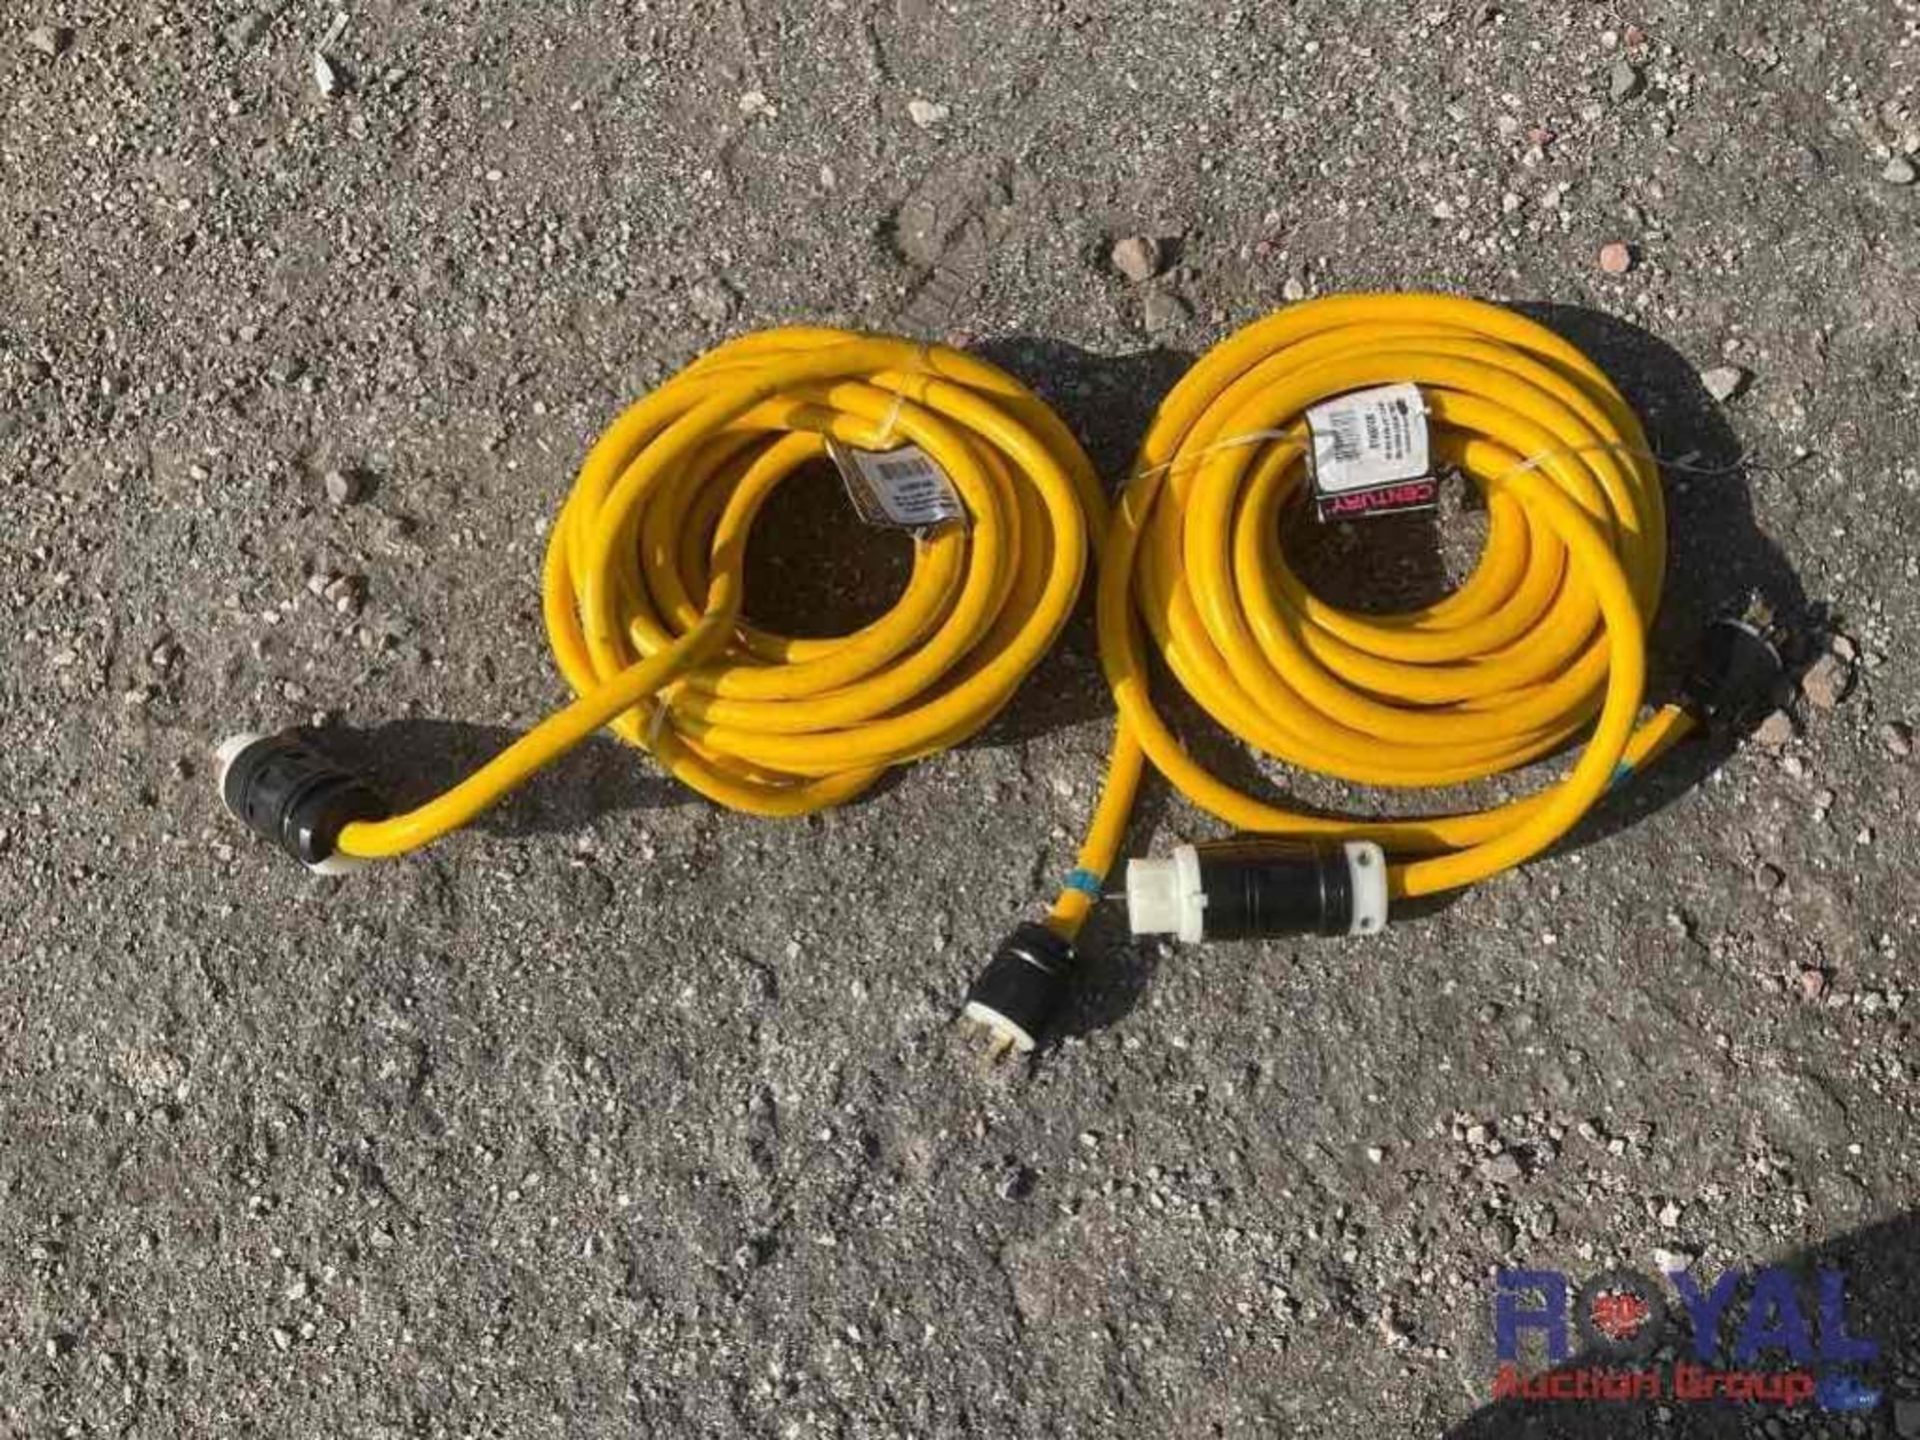 2-Century Wire Power Cords,Yellow, 50' 8/4 Cable - Image 3 of 7